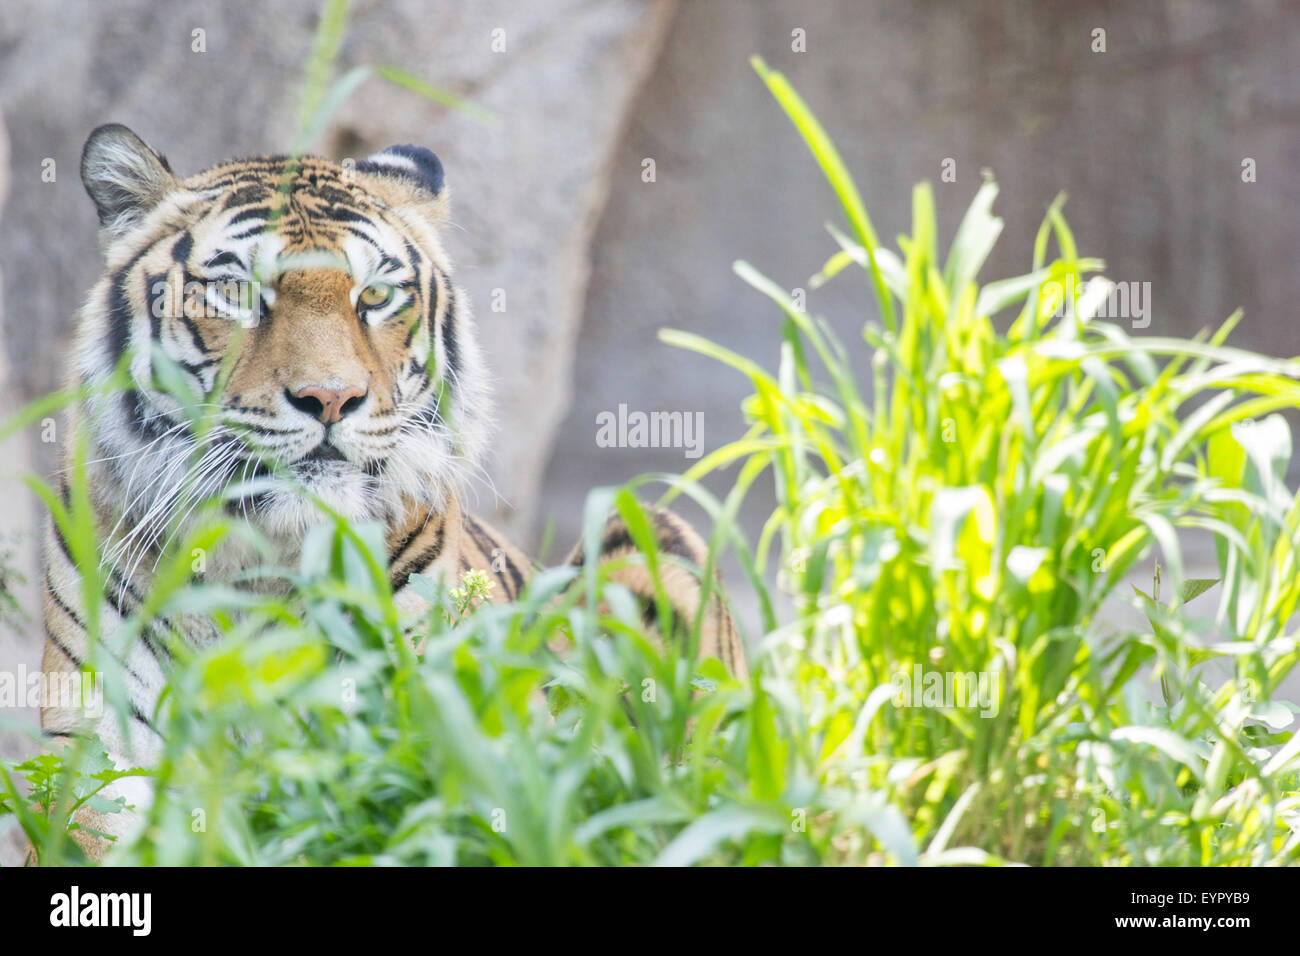 A tiger, Panthera tigris, is resting in the grass and looking at the camera Stock Photo